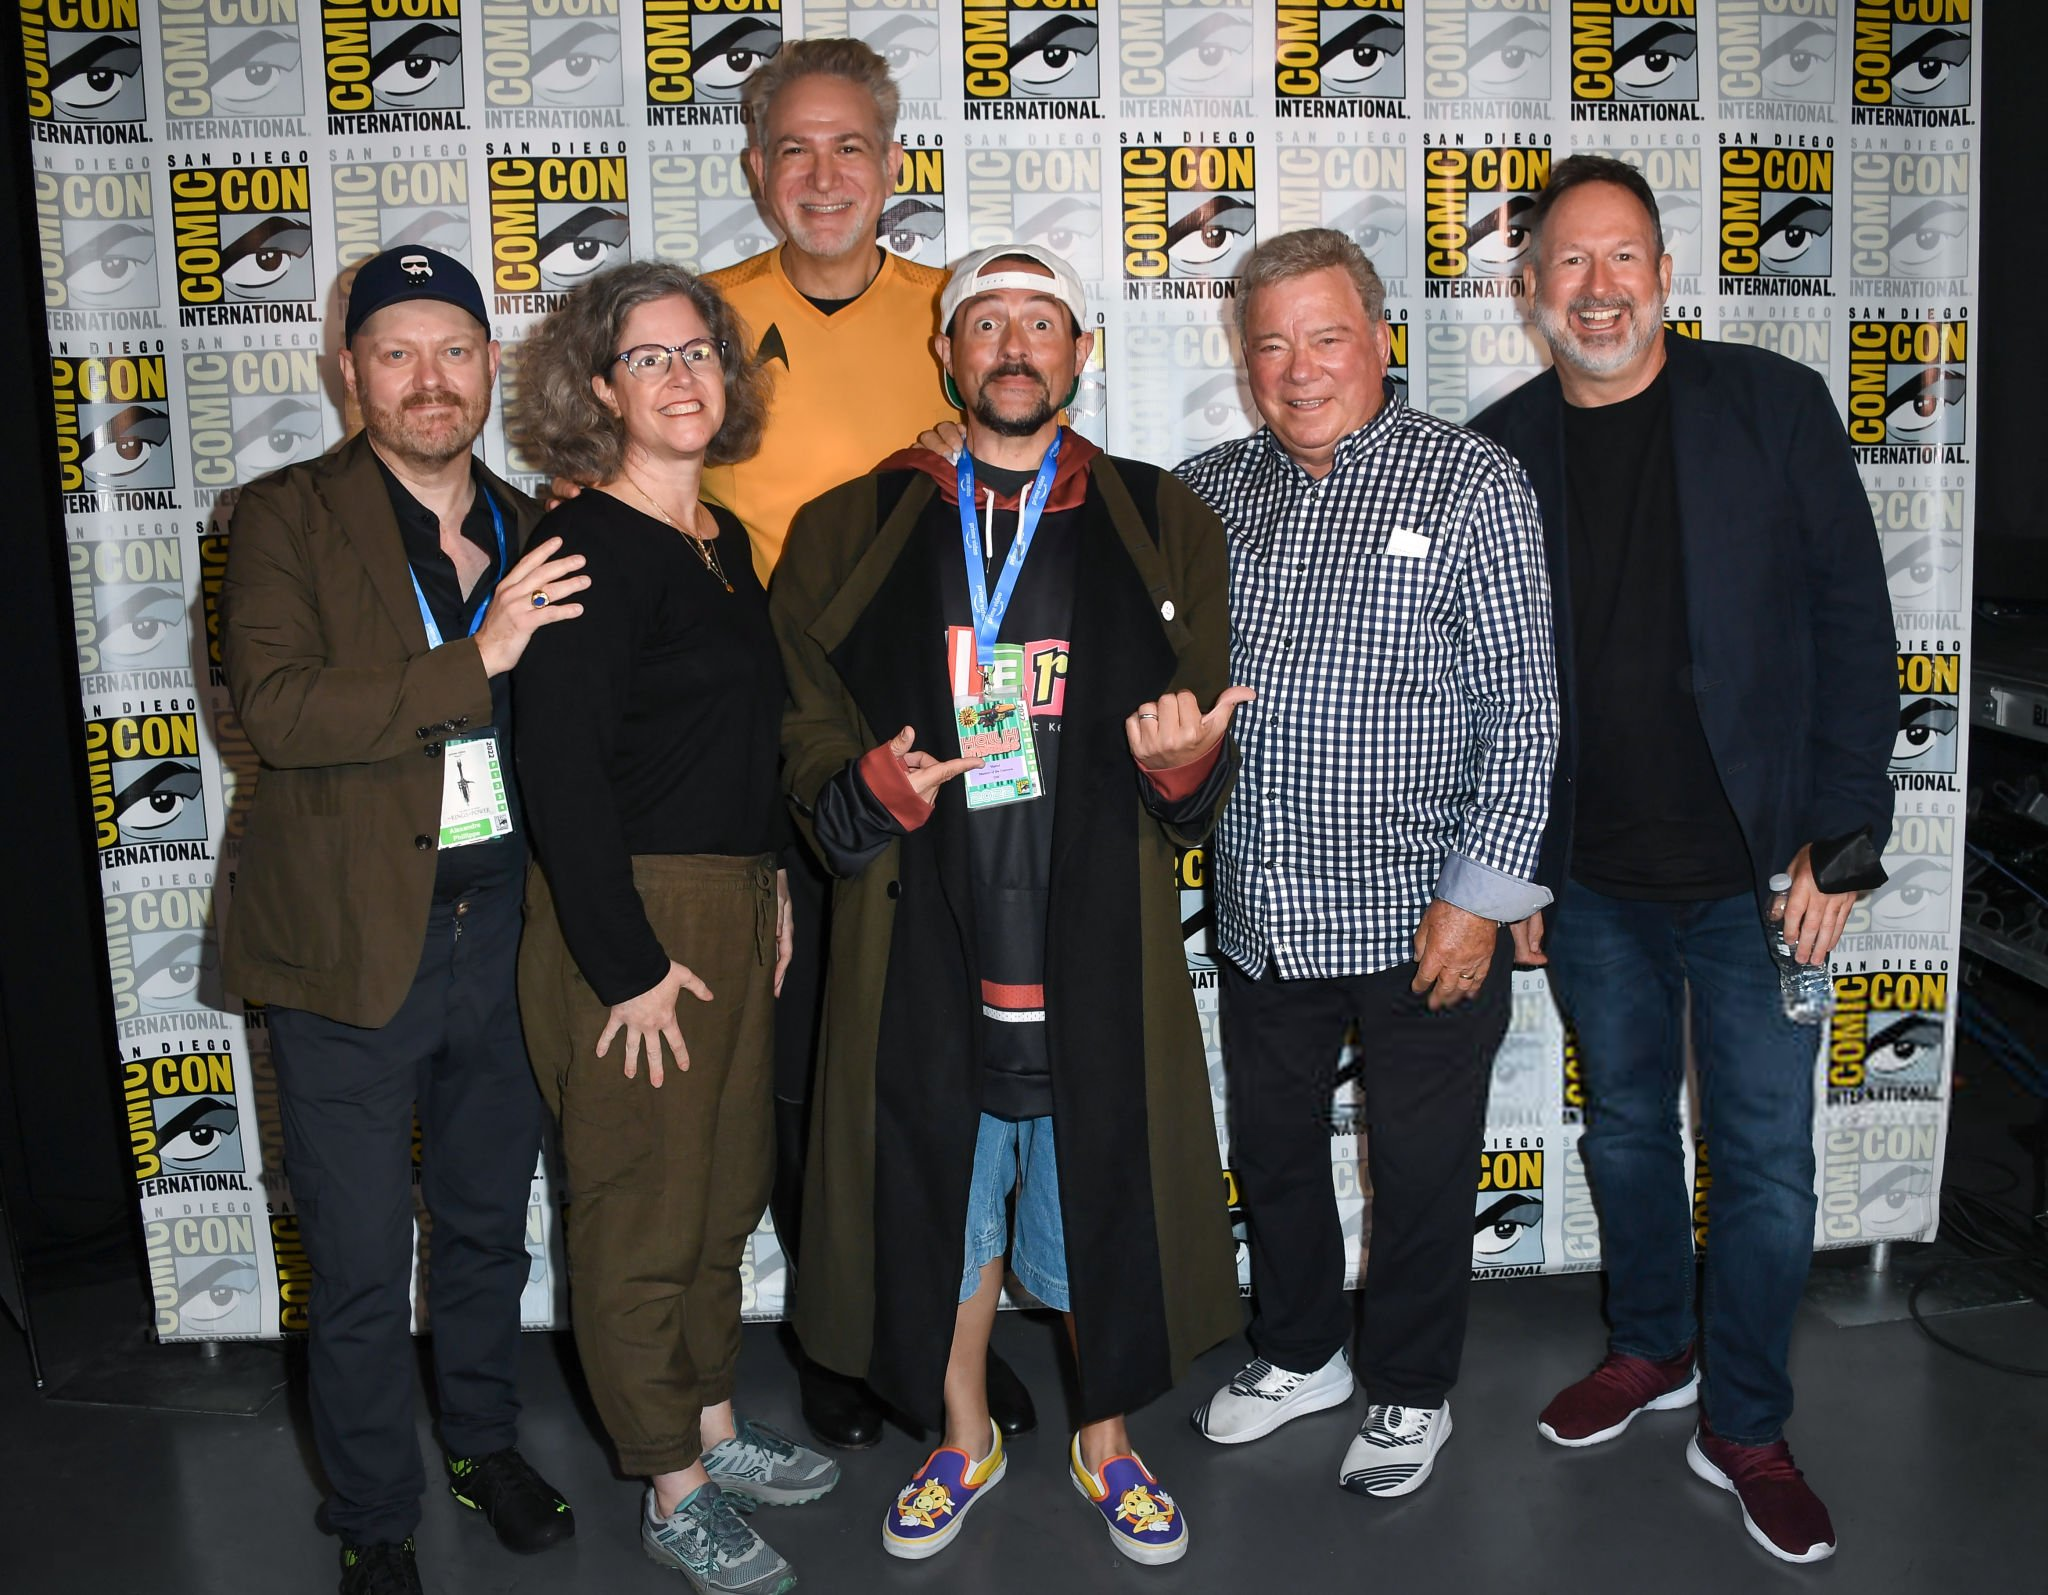  From left to right: Alexandre O. Philippe, Kerry Deignan Roy, David Baxter, Kevin Smith, William Shatner, and Jeff Annison.   Photo credit: Al Ortega / Getty Images 